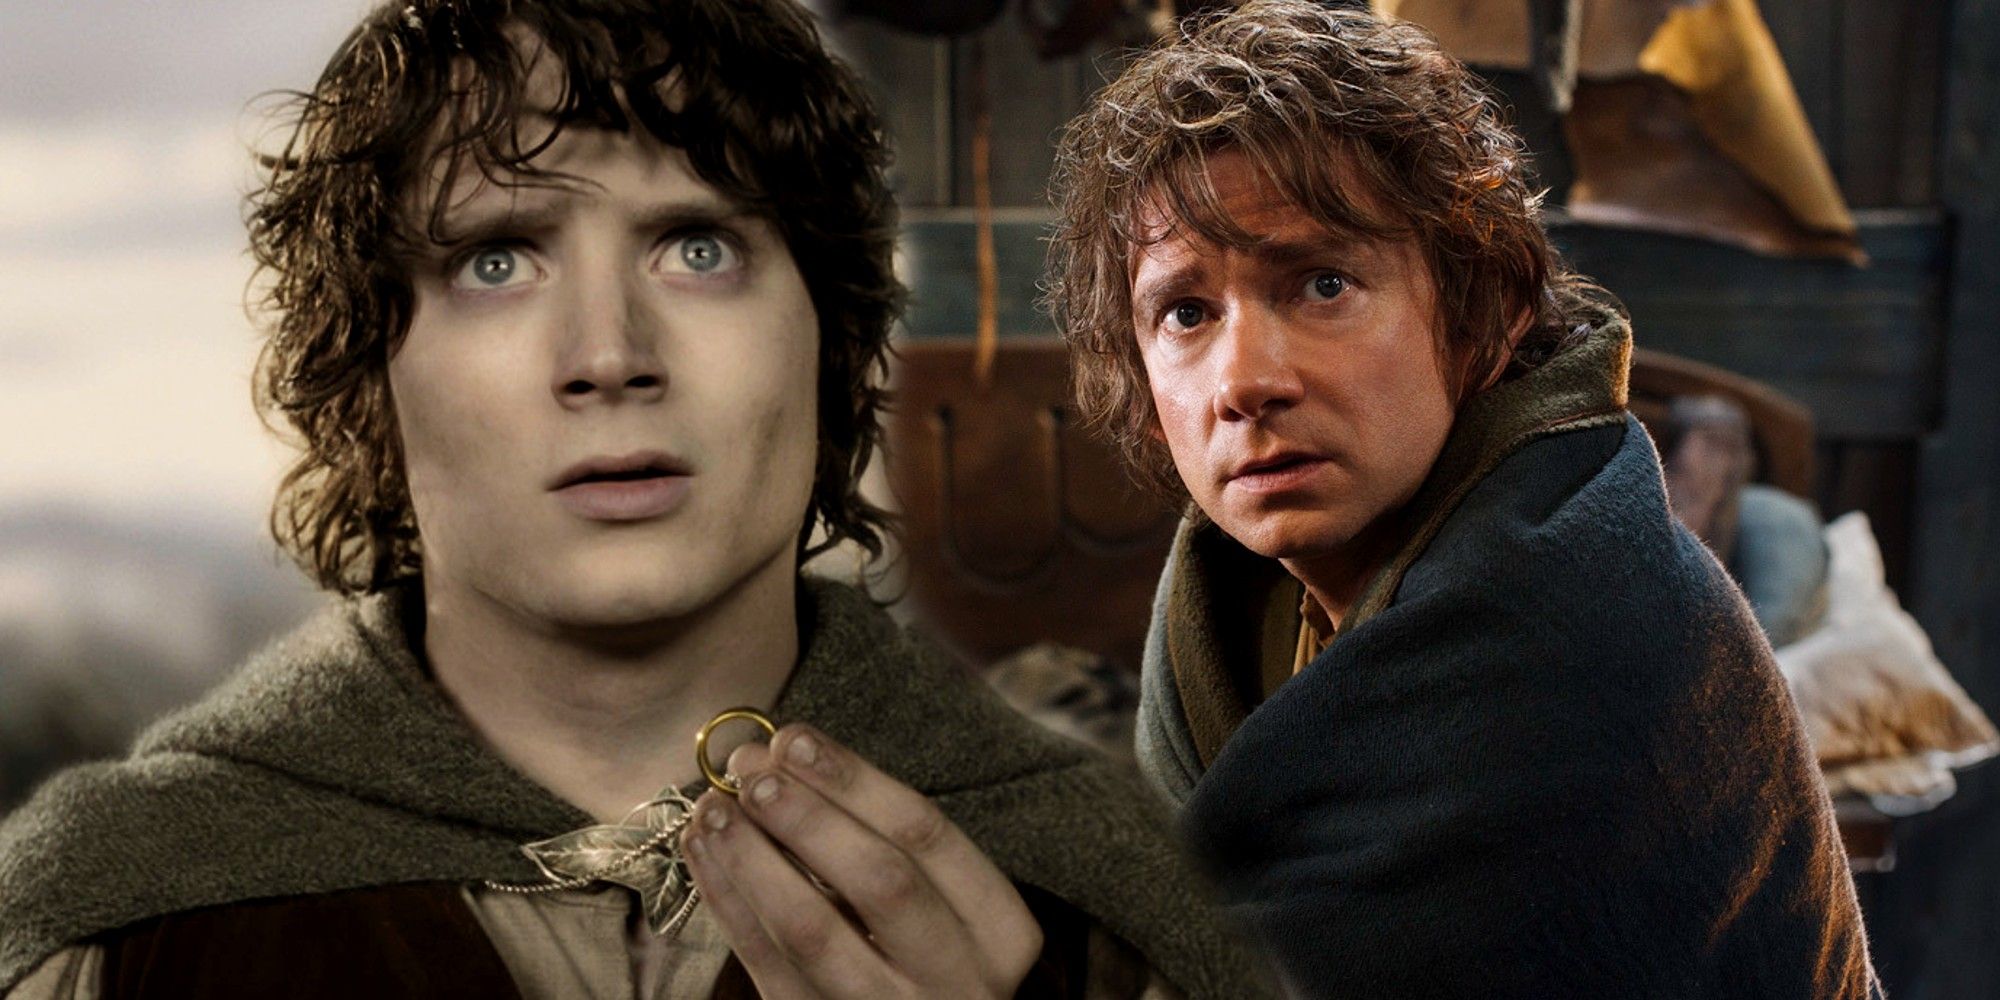 The Lord of the Rings and The Hobbit Elijah Wood and Martin Freeman as Frodo Baggins and Bilbo Baggins